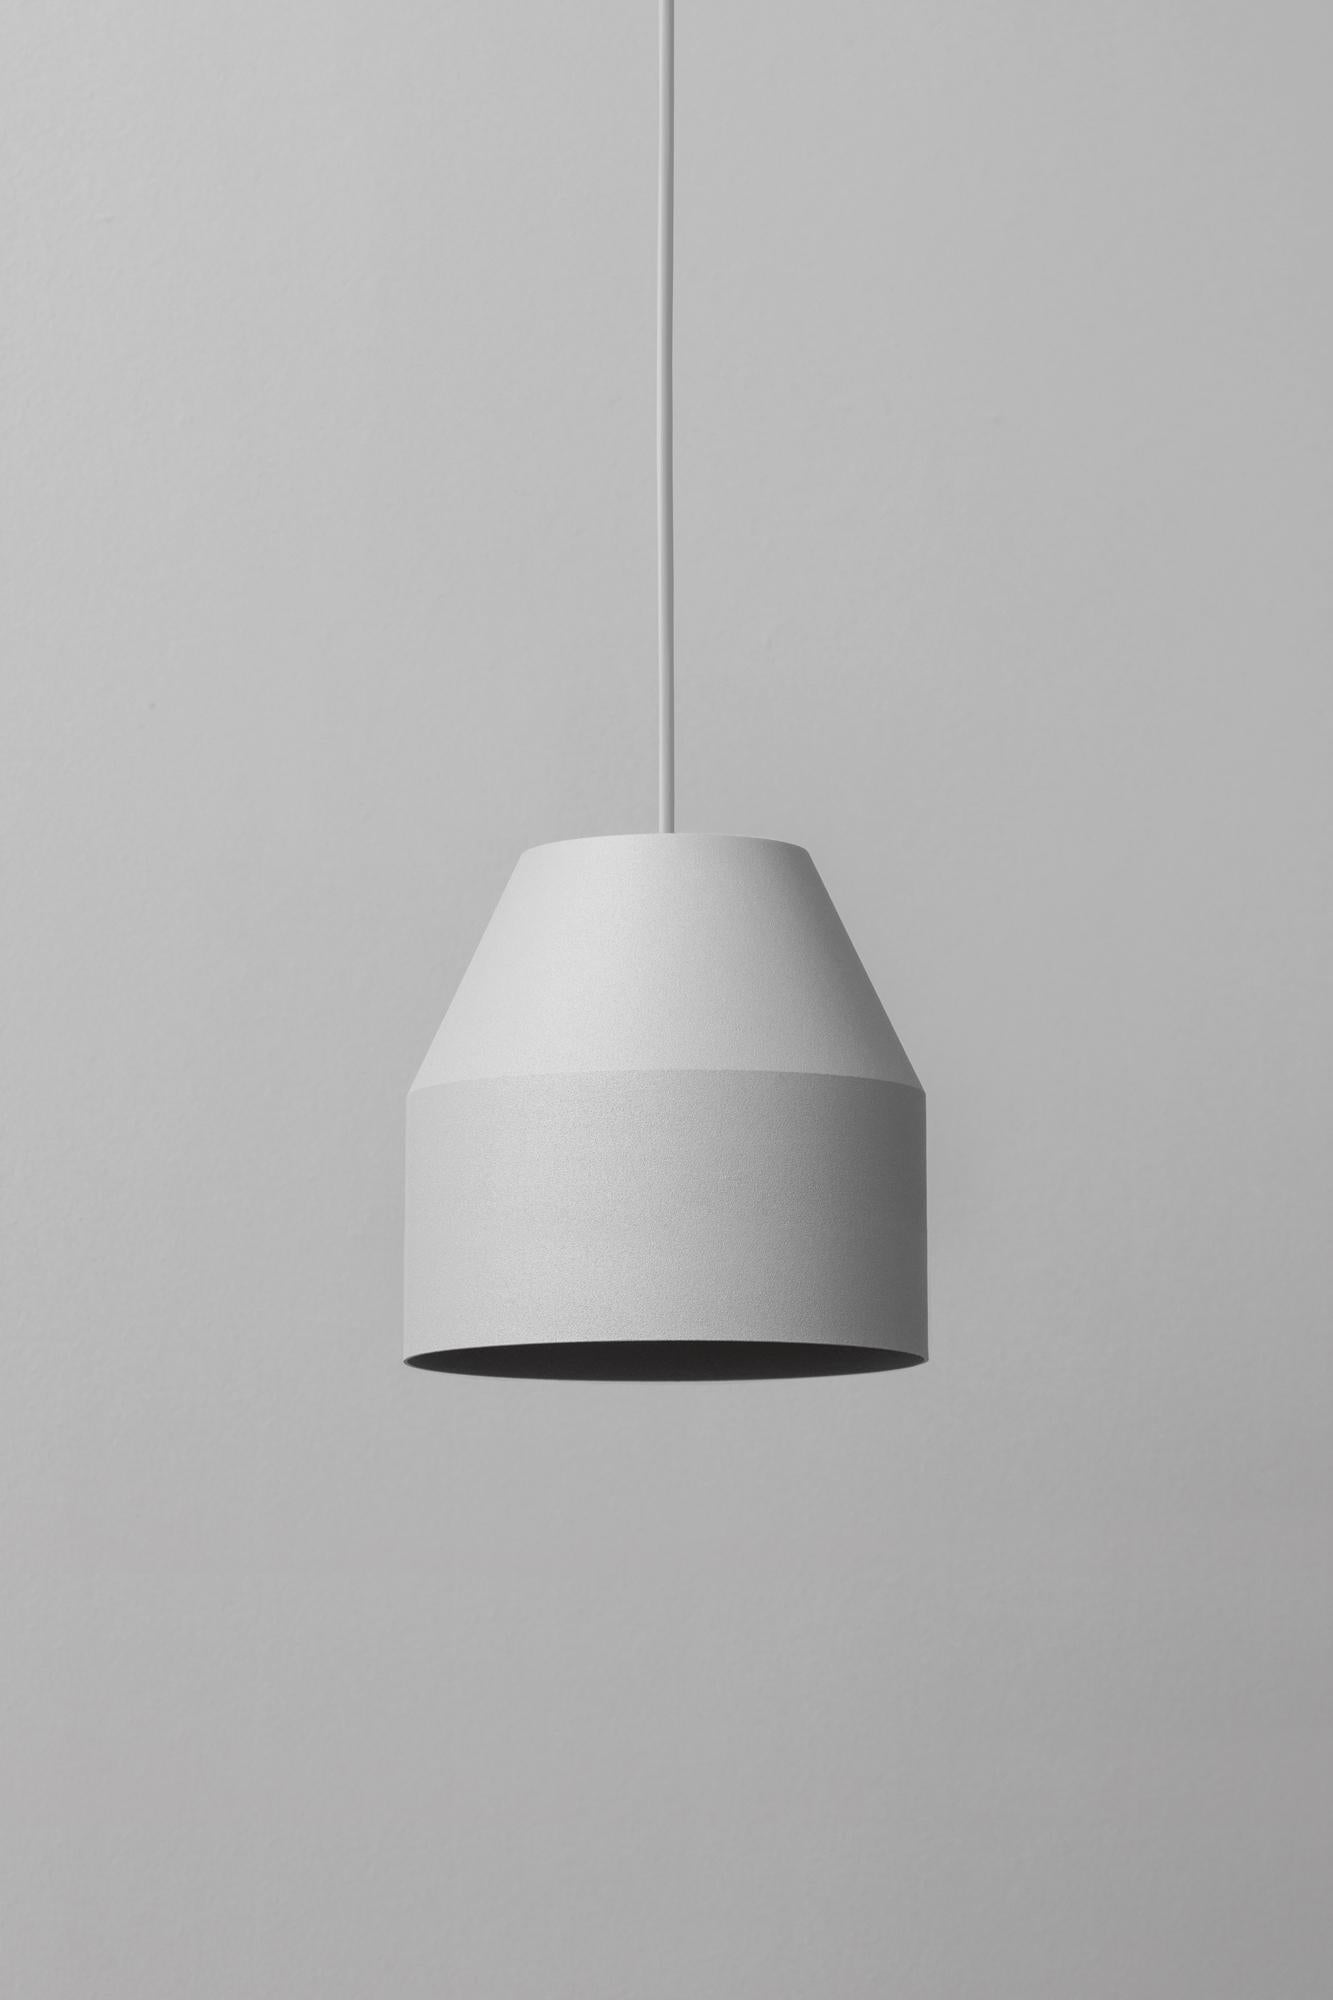 Big Grey Cap Pendant Lamp by +kouple
Dimensions: Ø 16 x H 16,5 cm. 
Materials: Powder-coated steel.

Available in different color options. Available in two different sizes. The rod length is 200 cm. Please contact us.

All our lamps can be wired